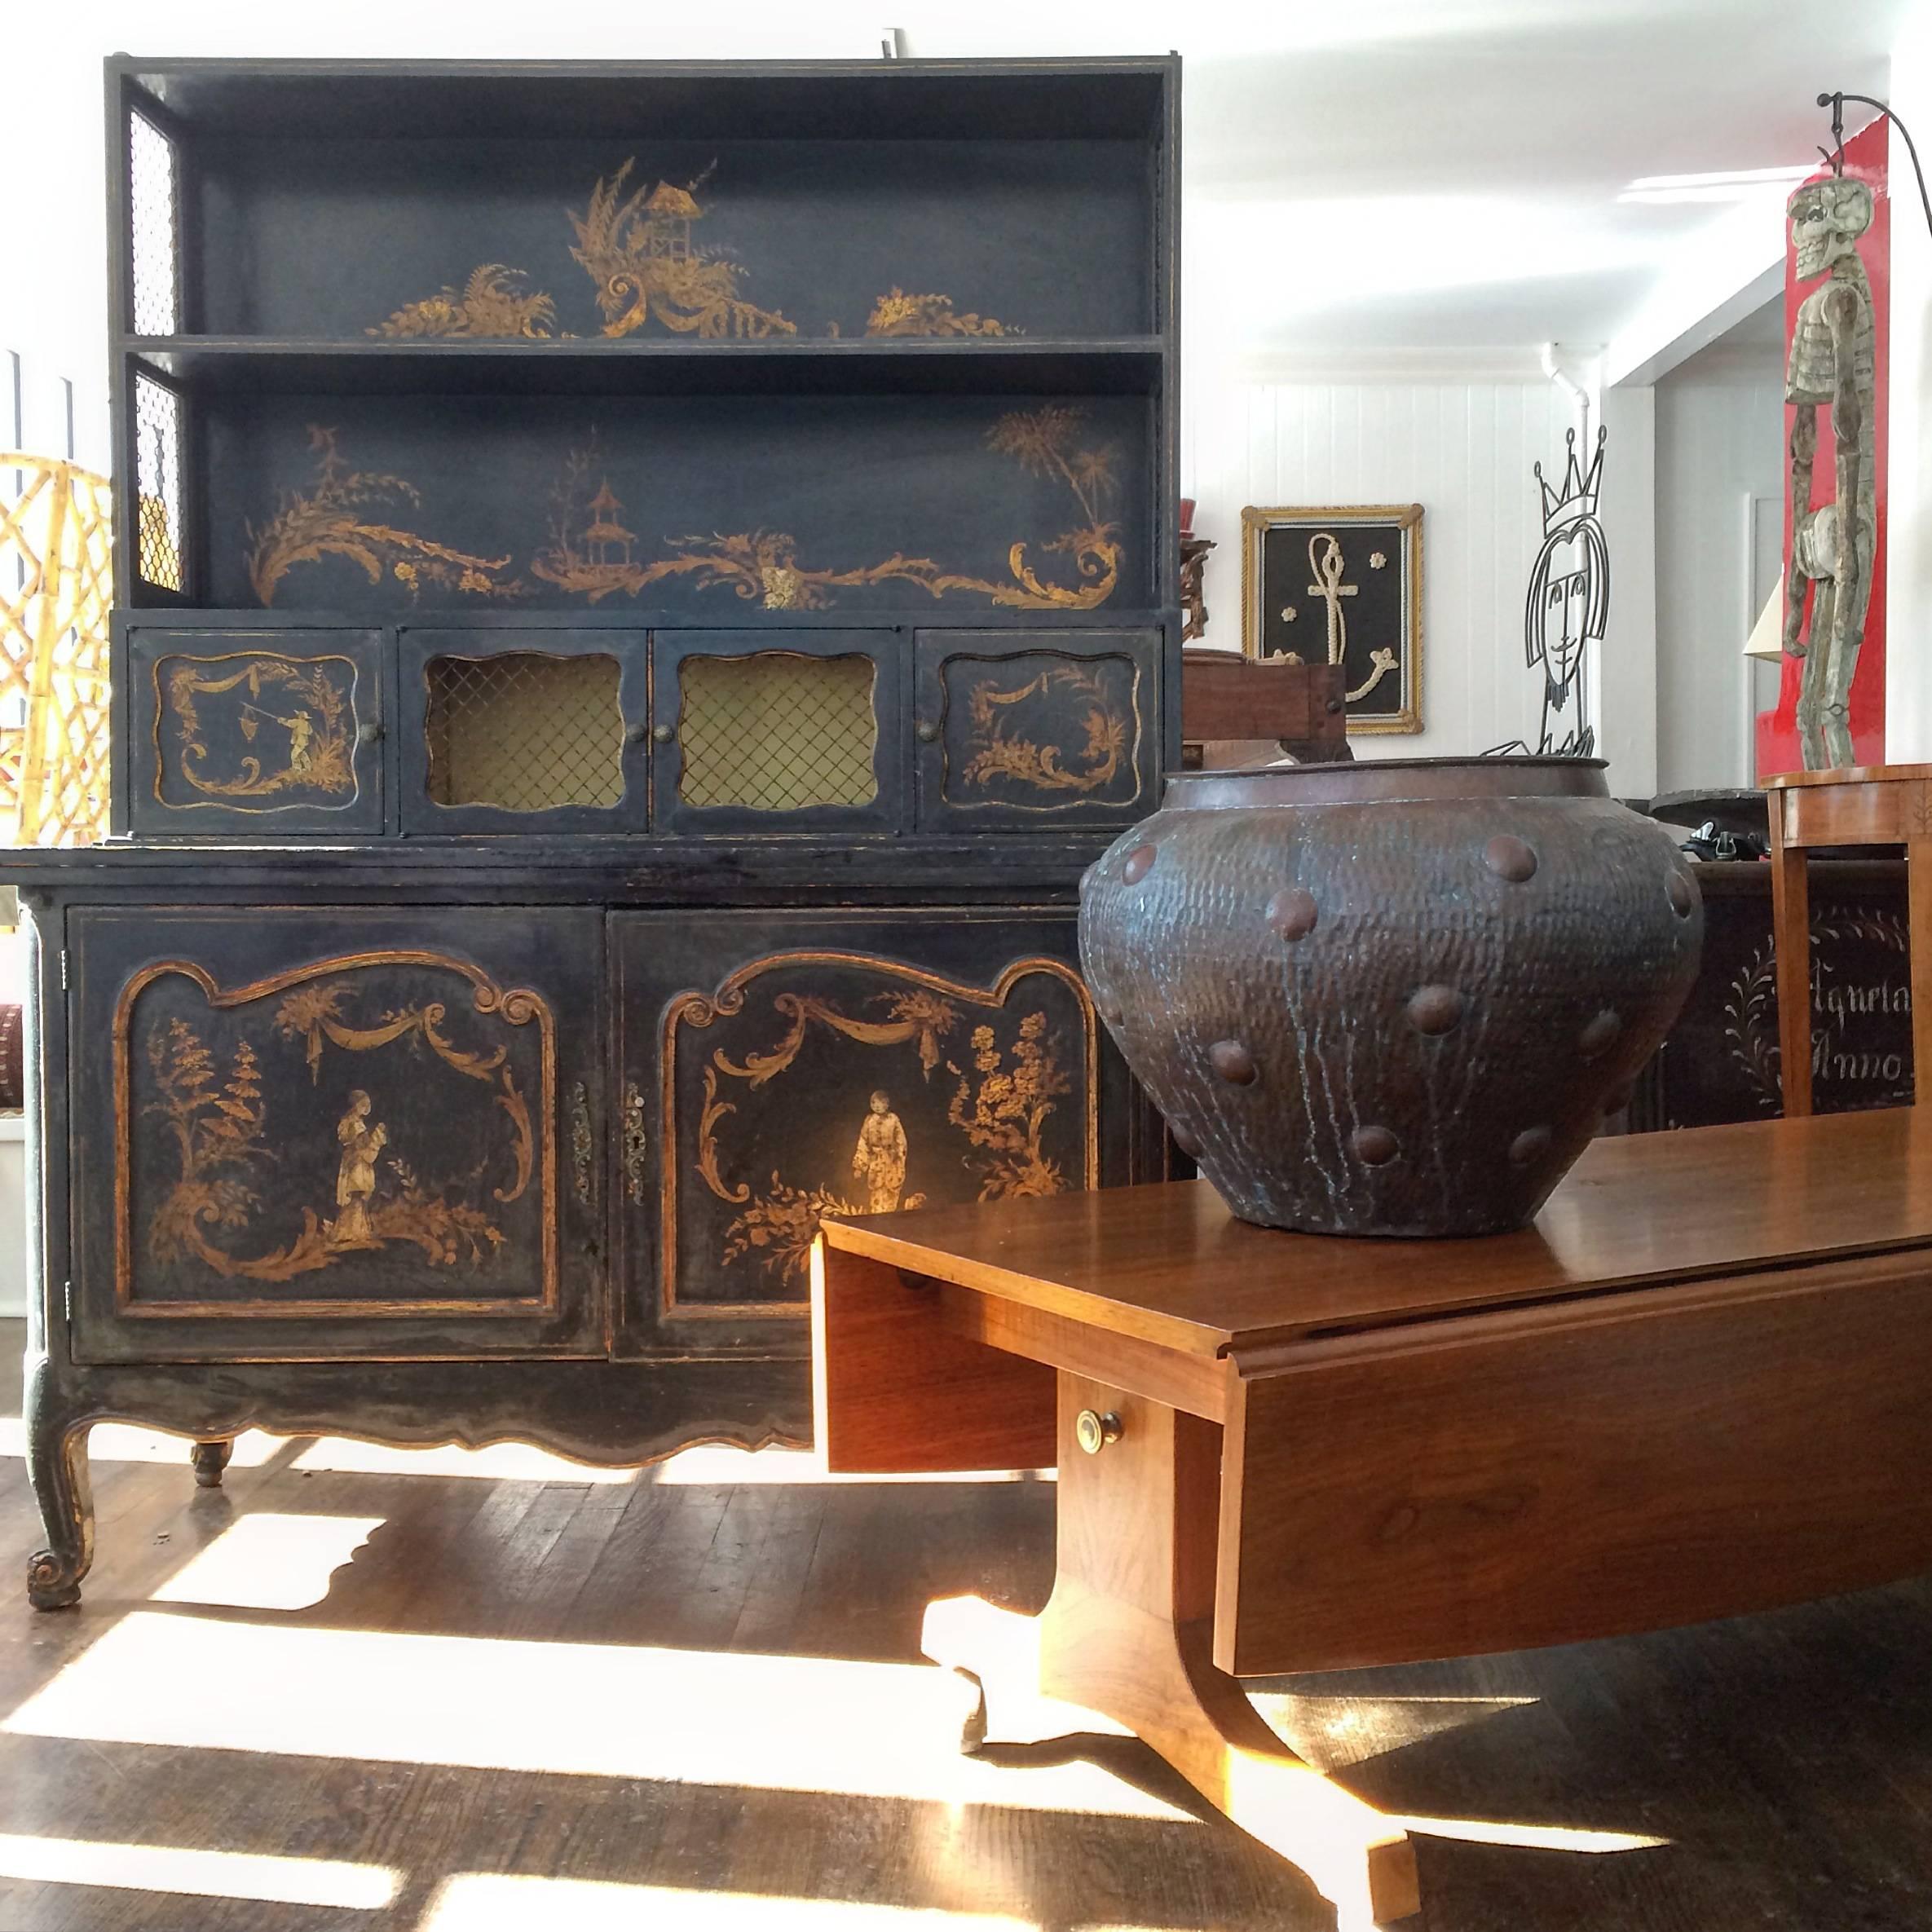 Louis XV French style chinoiserie cabinet- could be utilized as a secretary, bar or bookcase cabinet. Black painted frame with gold painted detail, folding green lacquer top.
   